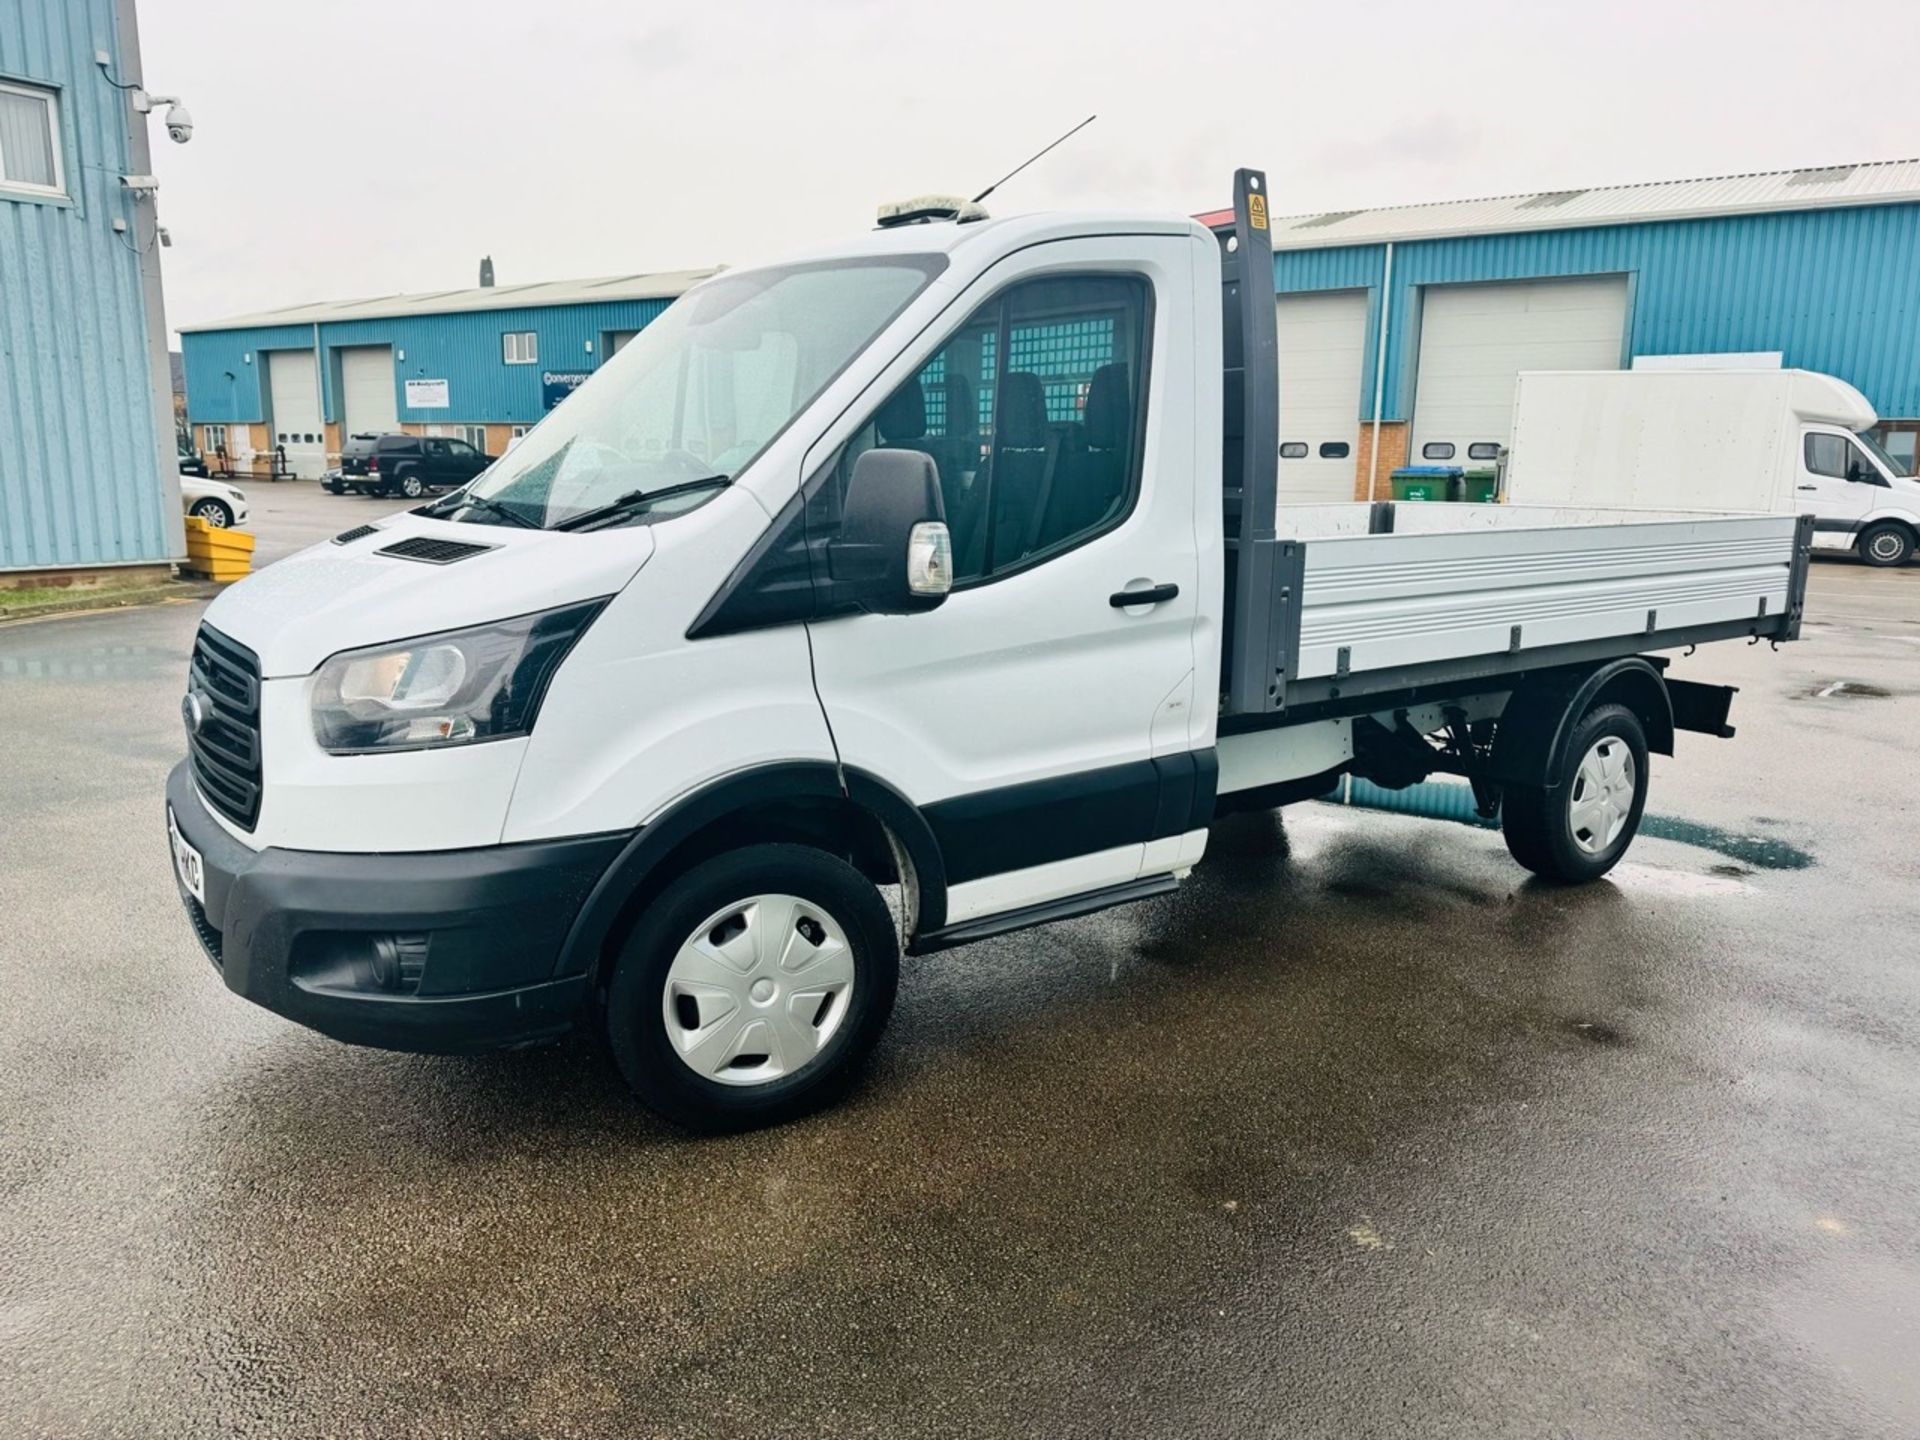 FORD TRANSIT 2.0 TIPPER130ps 'One Stop' Tipper - Manual - Diesel - 2.0 - Tipper Body 94.6k miles - Image 2 of 7